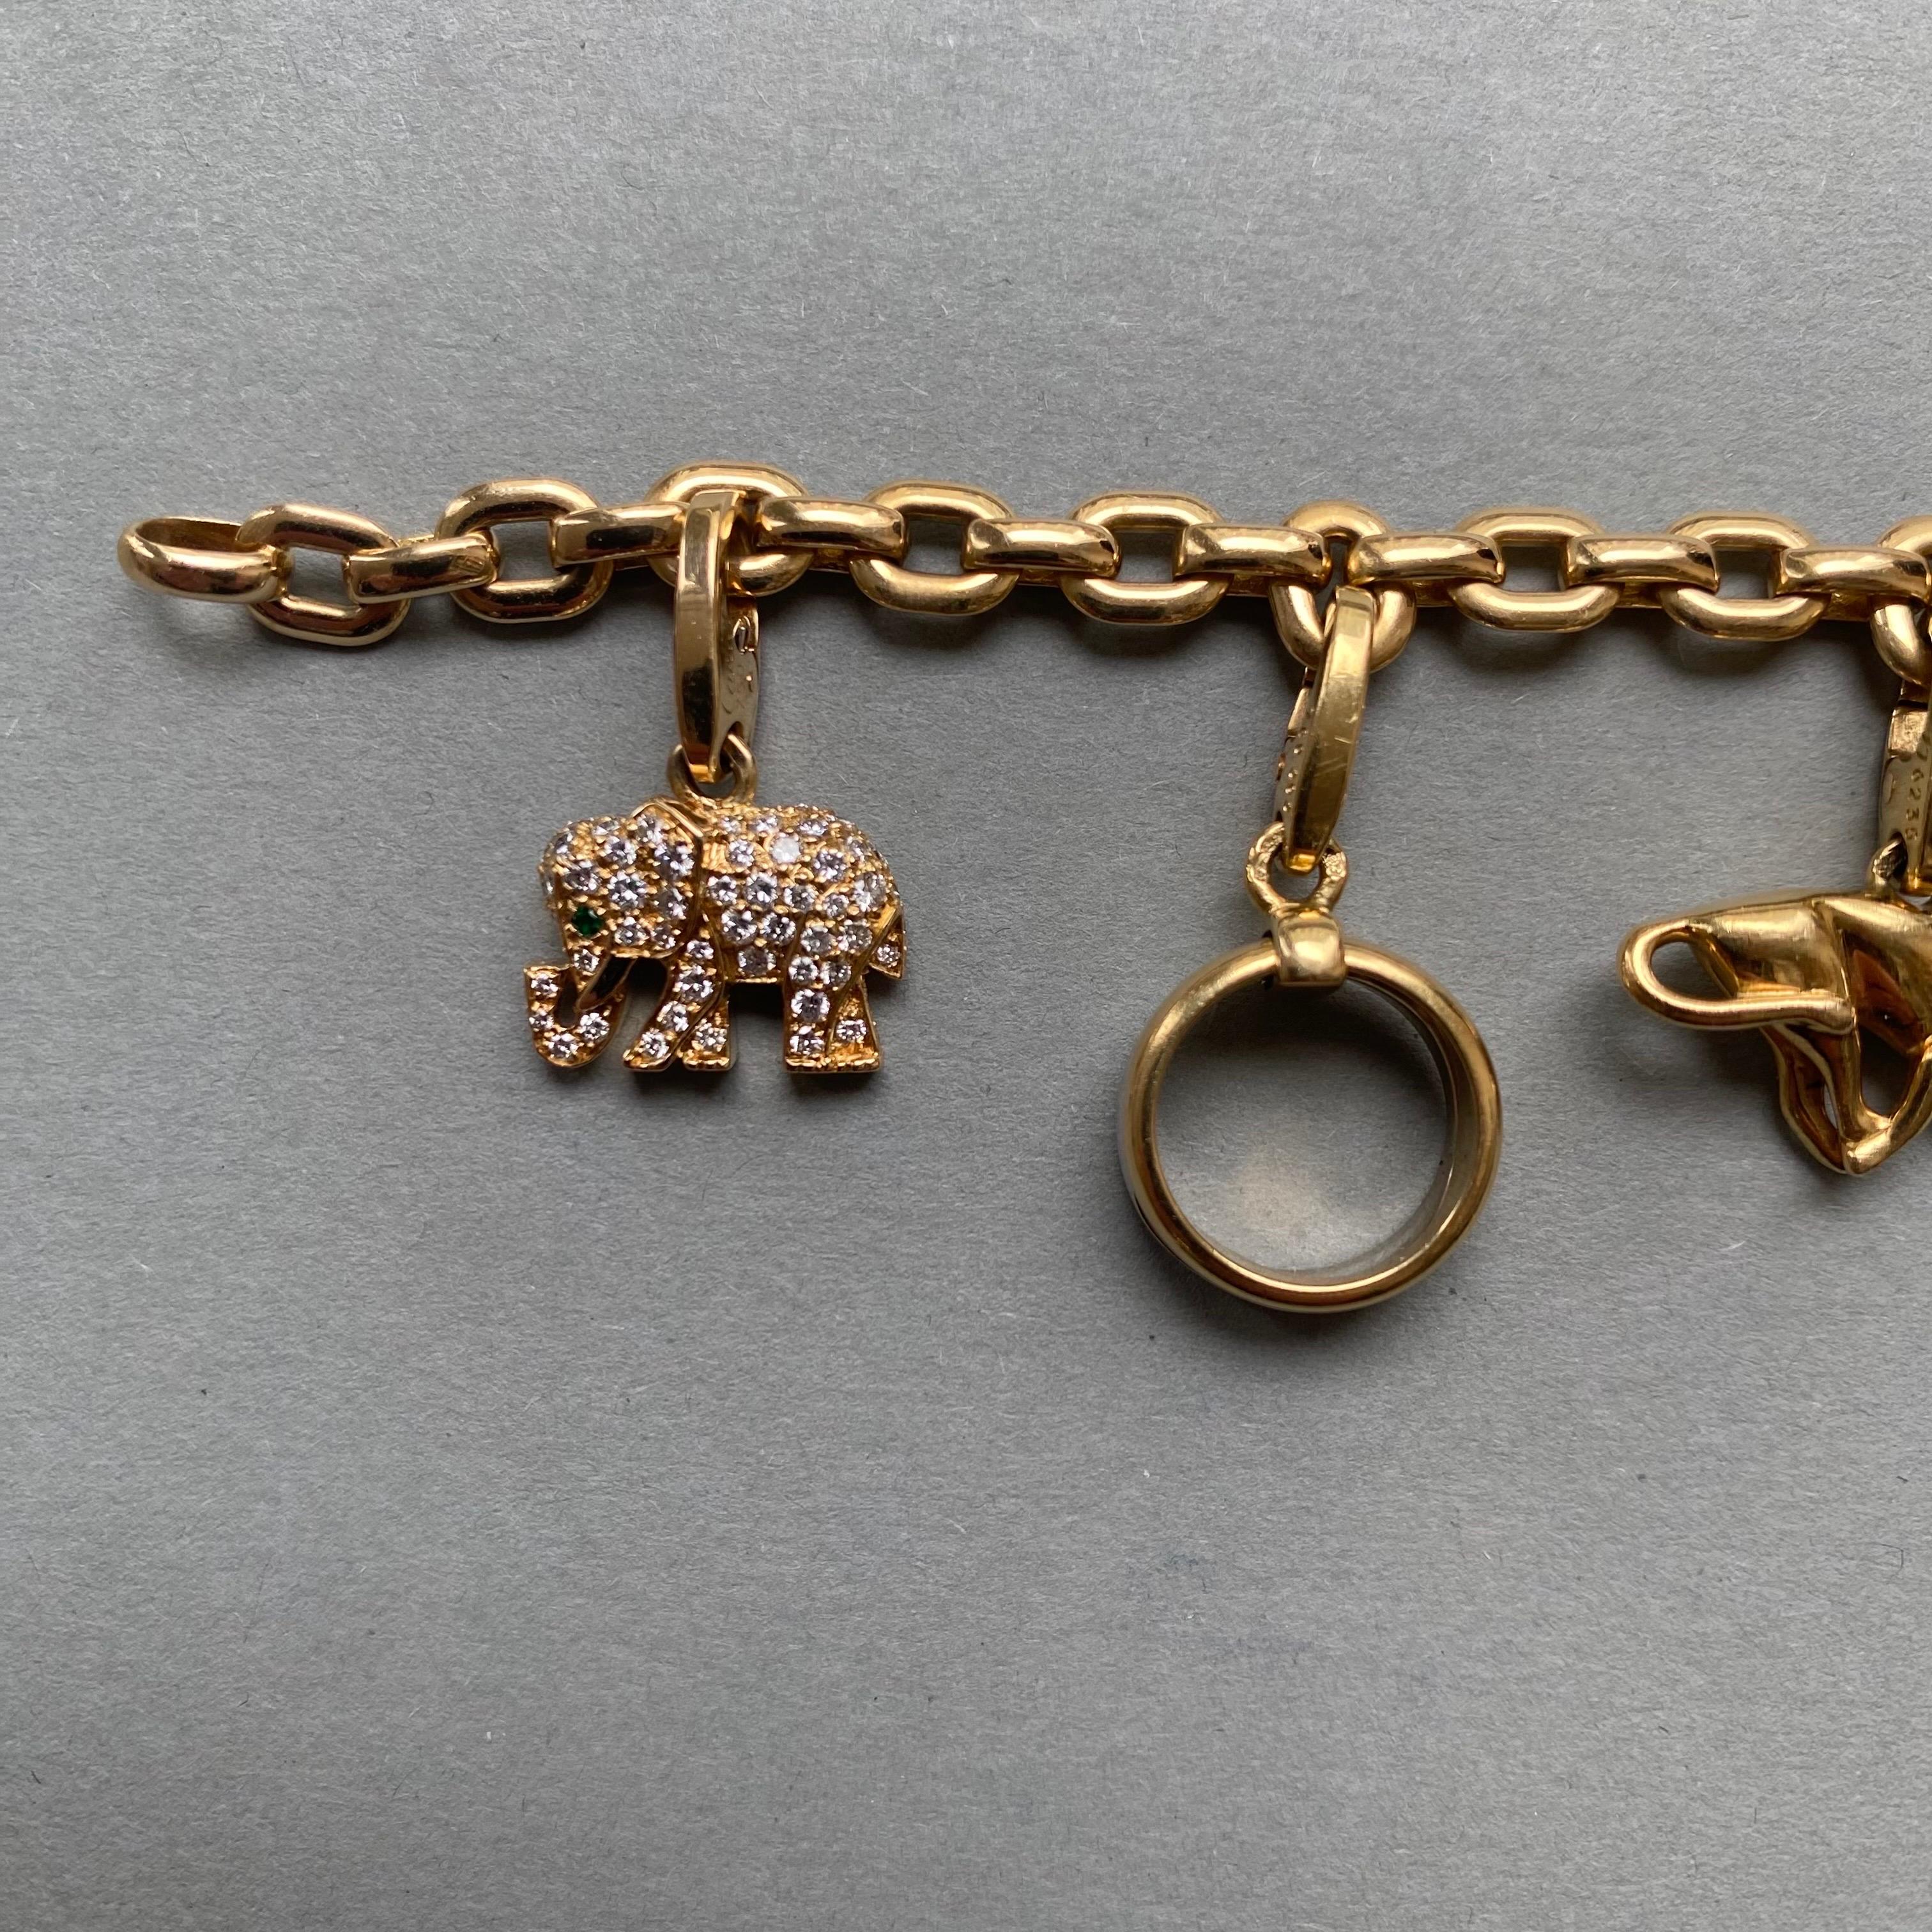 An 18 carat gold Meplat Cartier (signed and numbered) bracelet with 7 detachable signed and numbered Cartier charms (the love charm and the elephant and the bracelet come with their Cartier cetificates.

weight: 42.7 grams
Length: 20 cm